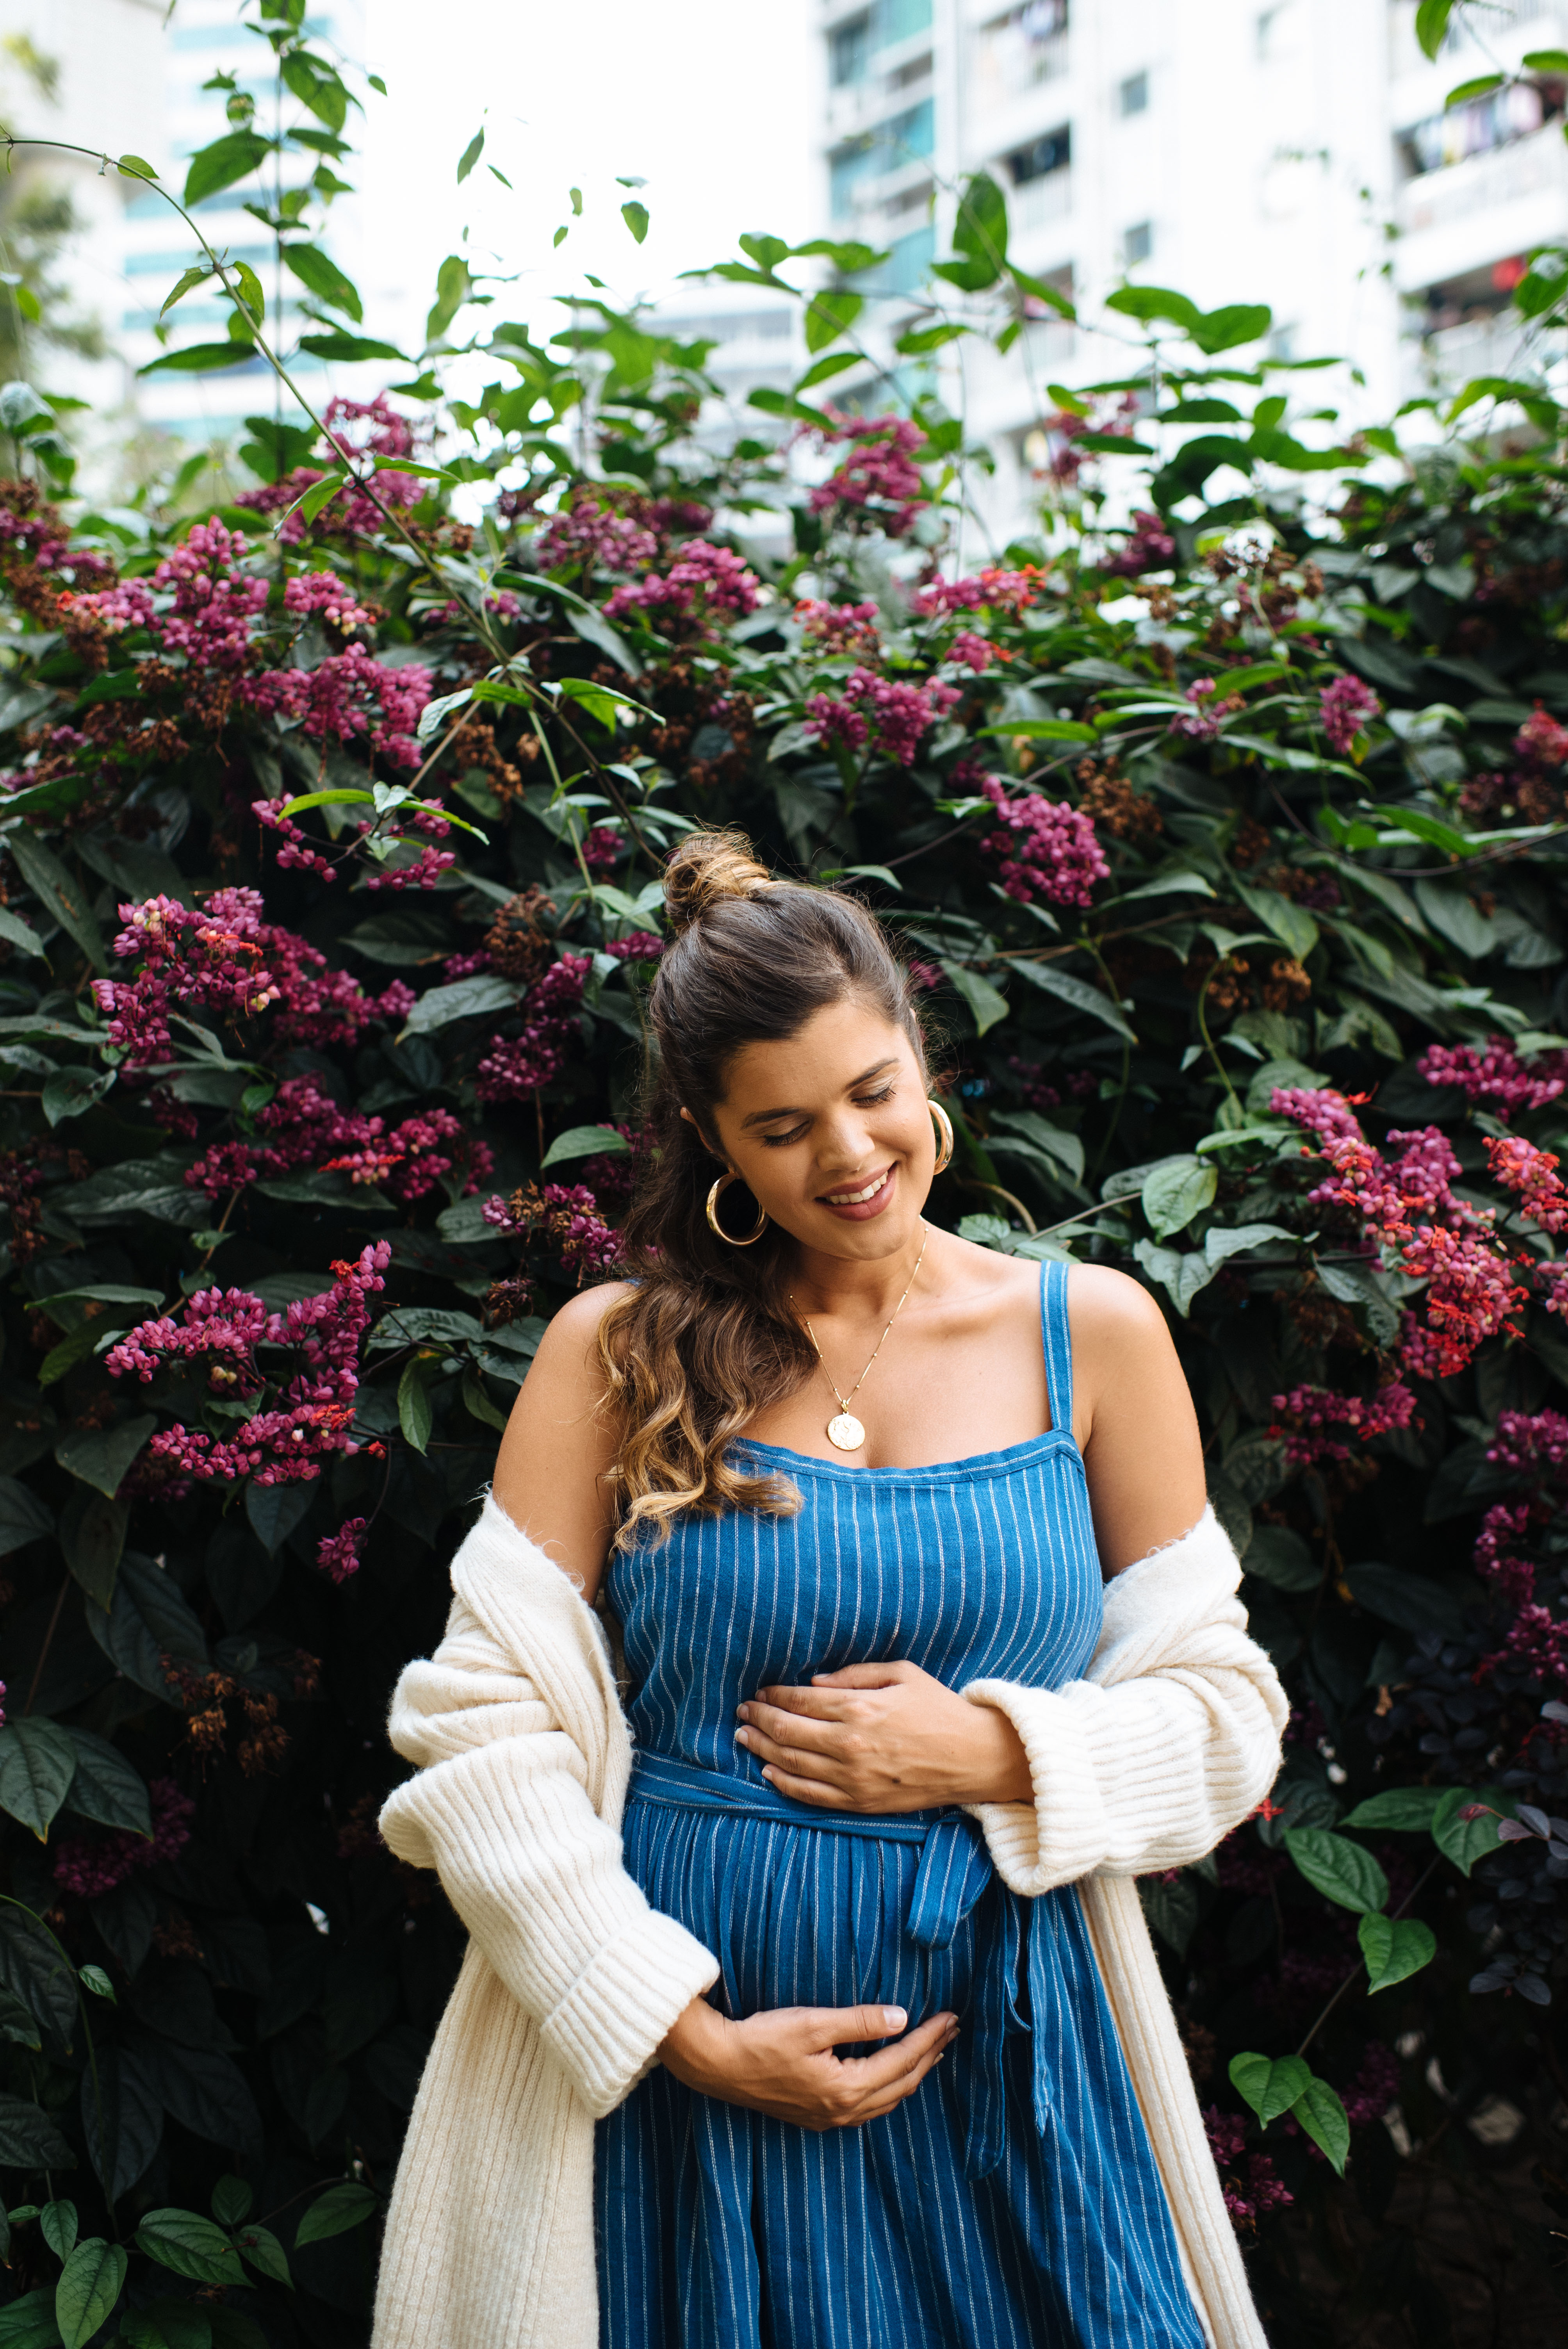 Second Trimester Outfits